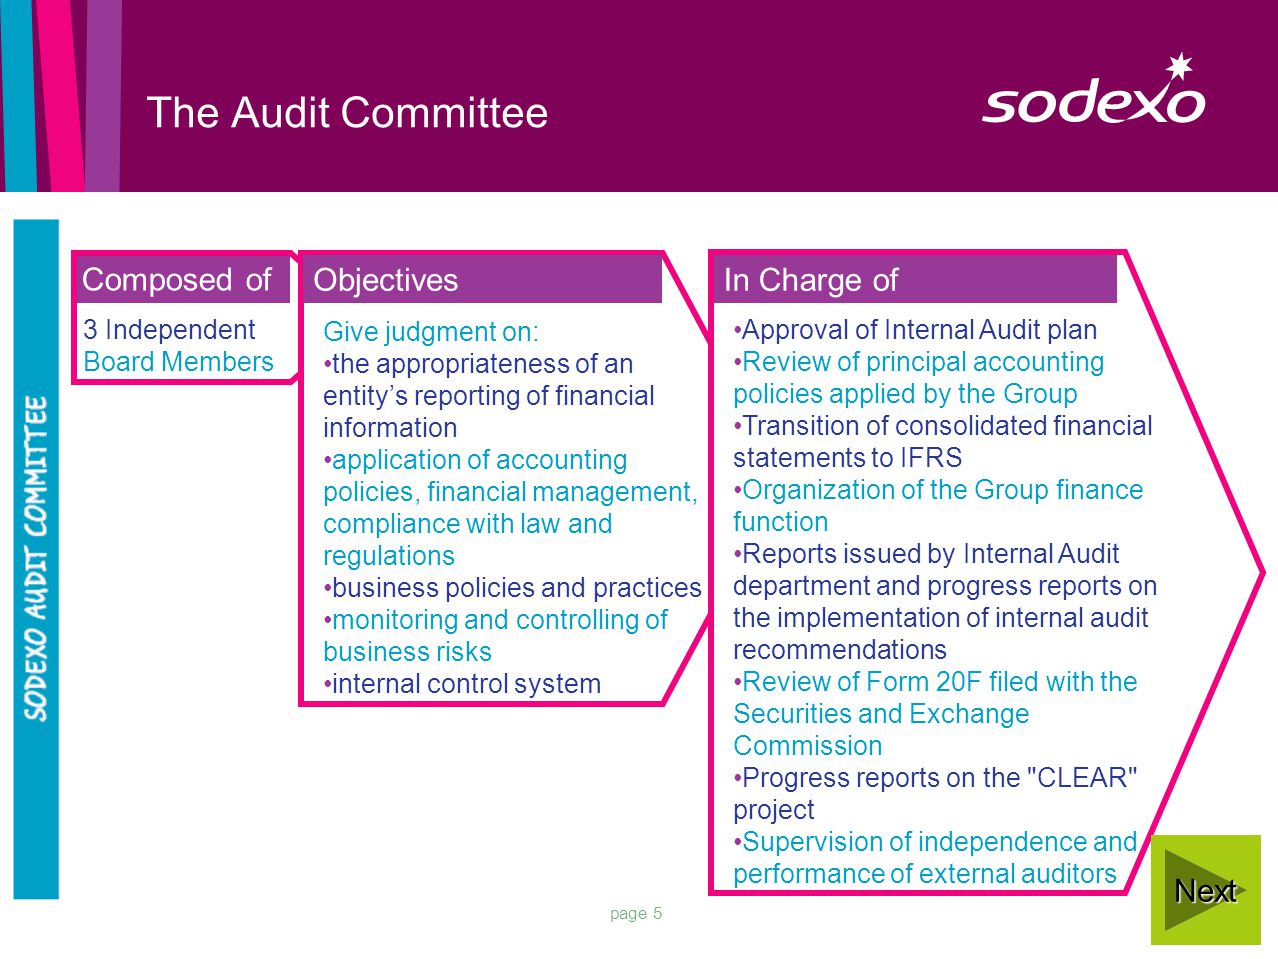 page 5 The Audit Committee Composed of 3 Independent Board Members Give judgment on: the appropriateness of an entity’s reporting of financial information application of accounting policies, financial management, compliance with law and regulations business policies and practices monitoring and controlling of business risks internal control system Objectives Approval of Internal Audit plan Review of principal accounting policies applied by the Group Transition of consolidated financial statements to IFRS Organization of the Group finance function Reports issued by Internal Audit department and progress reports on the implementation of internal audit recommendations Review of Form 20F filed with the Securities and Exchange Commission Progress reports on the CLEAR project Supervision of independence and performance of external auditors In Charge of Next